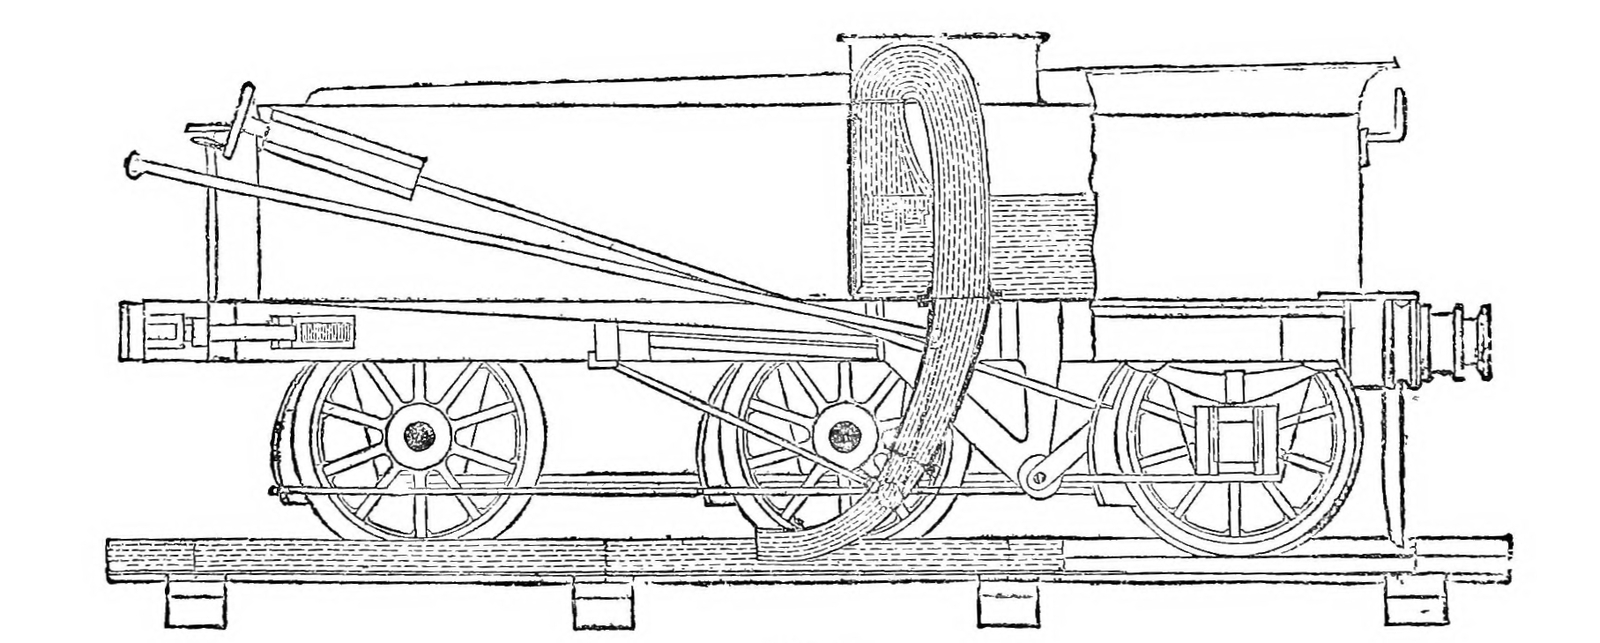 Schematic of a tender with a scoop as first used by the Problem class